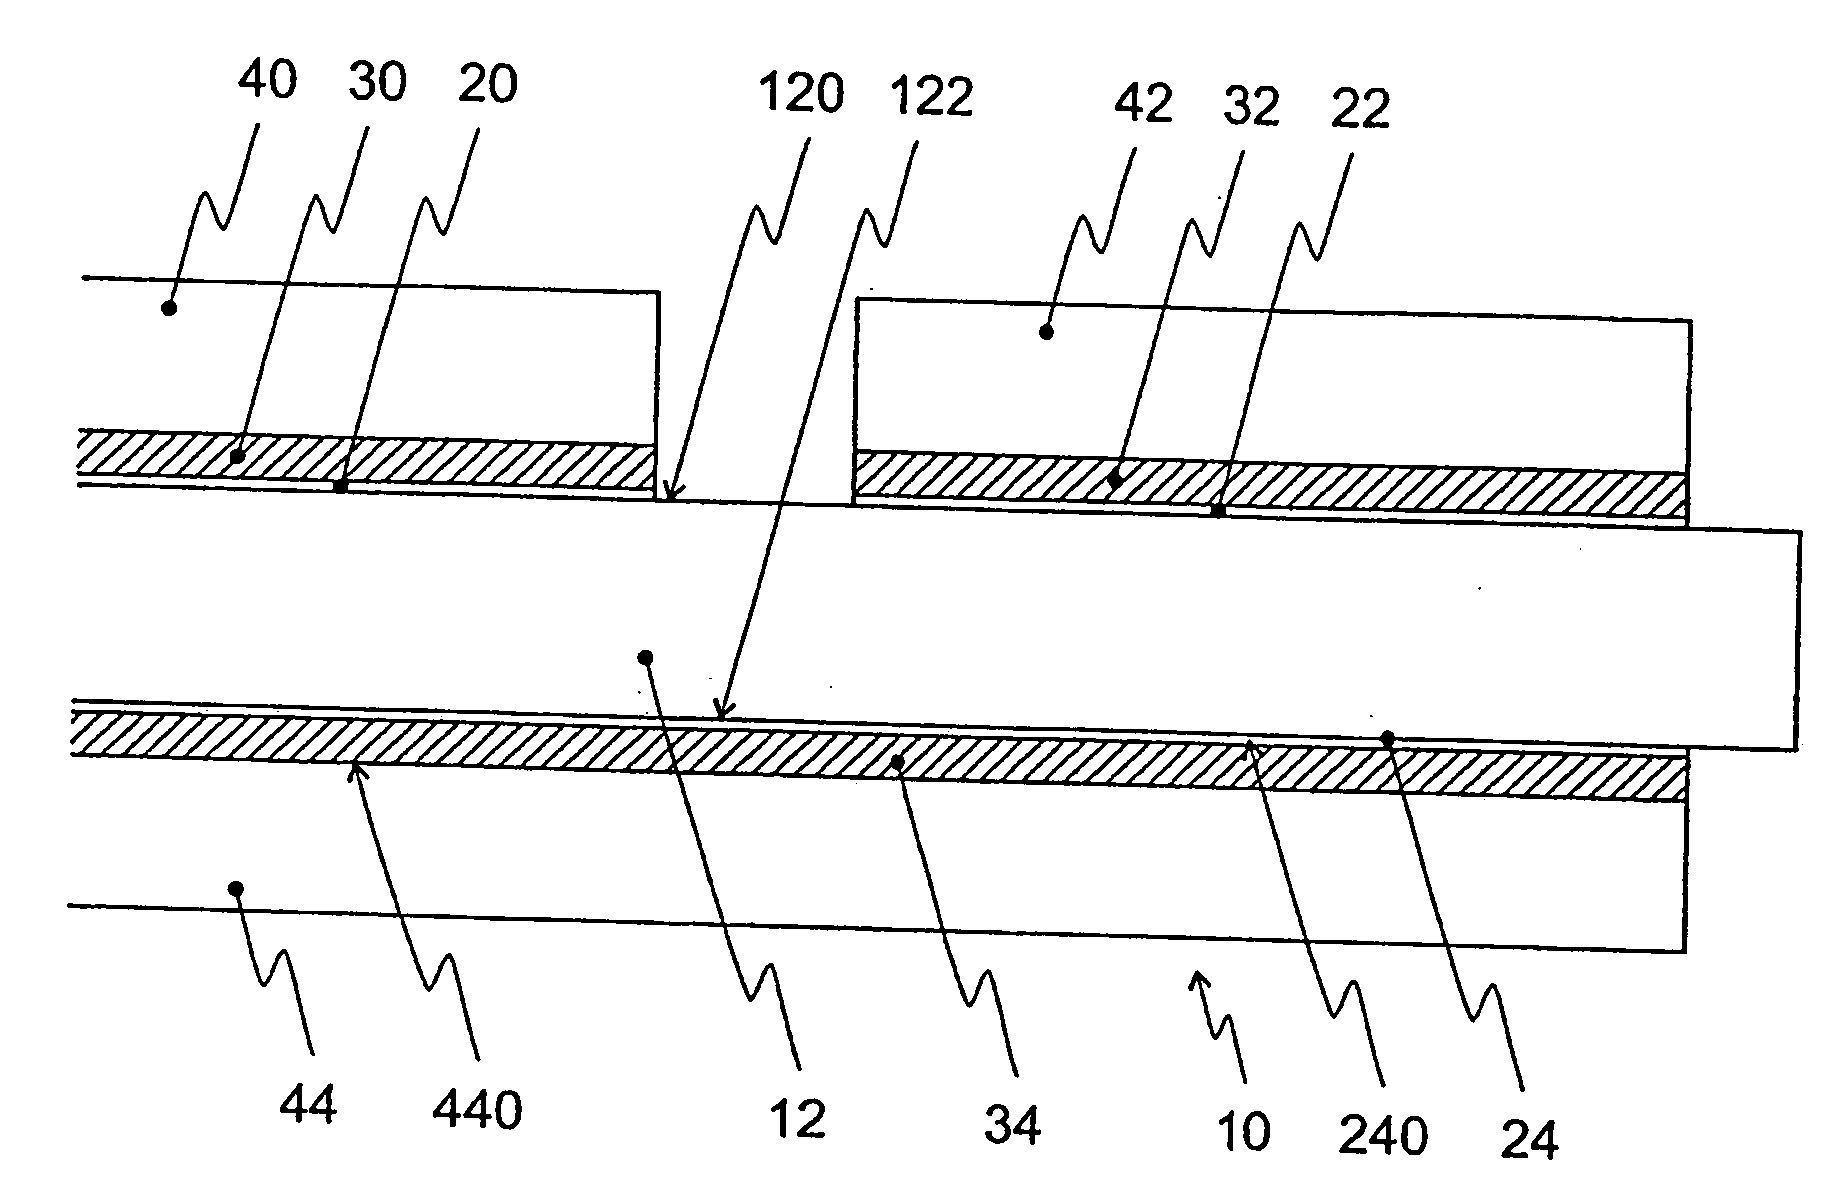 Sintered power semiconductor substrate and method of producing the substrate